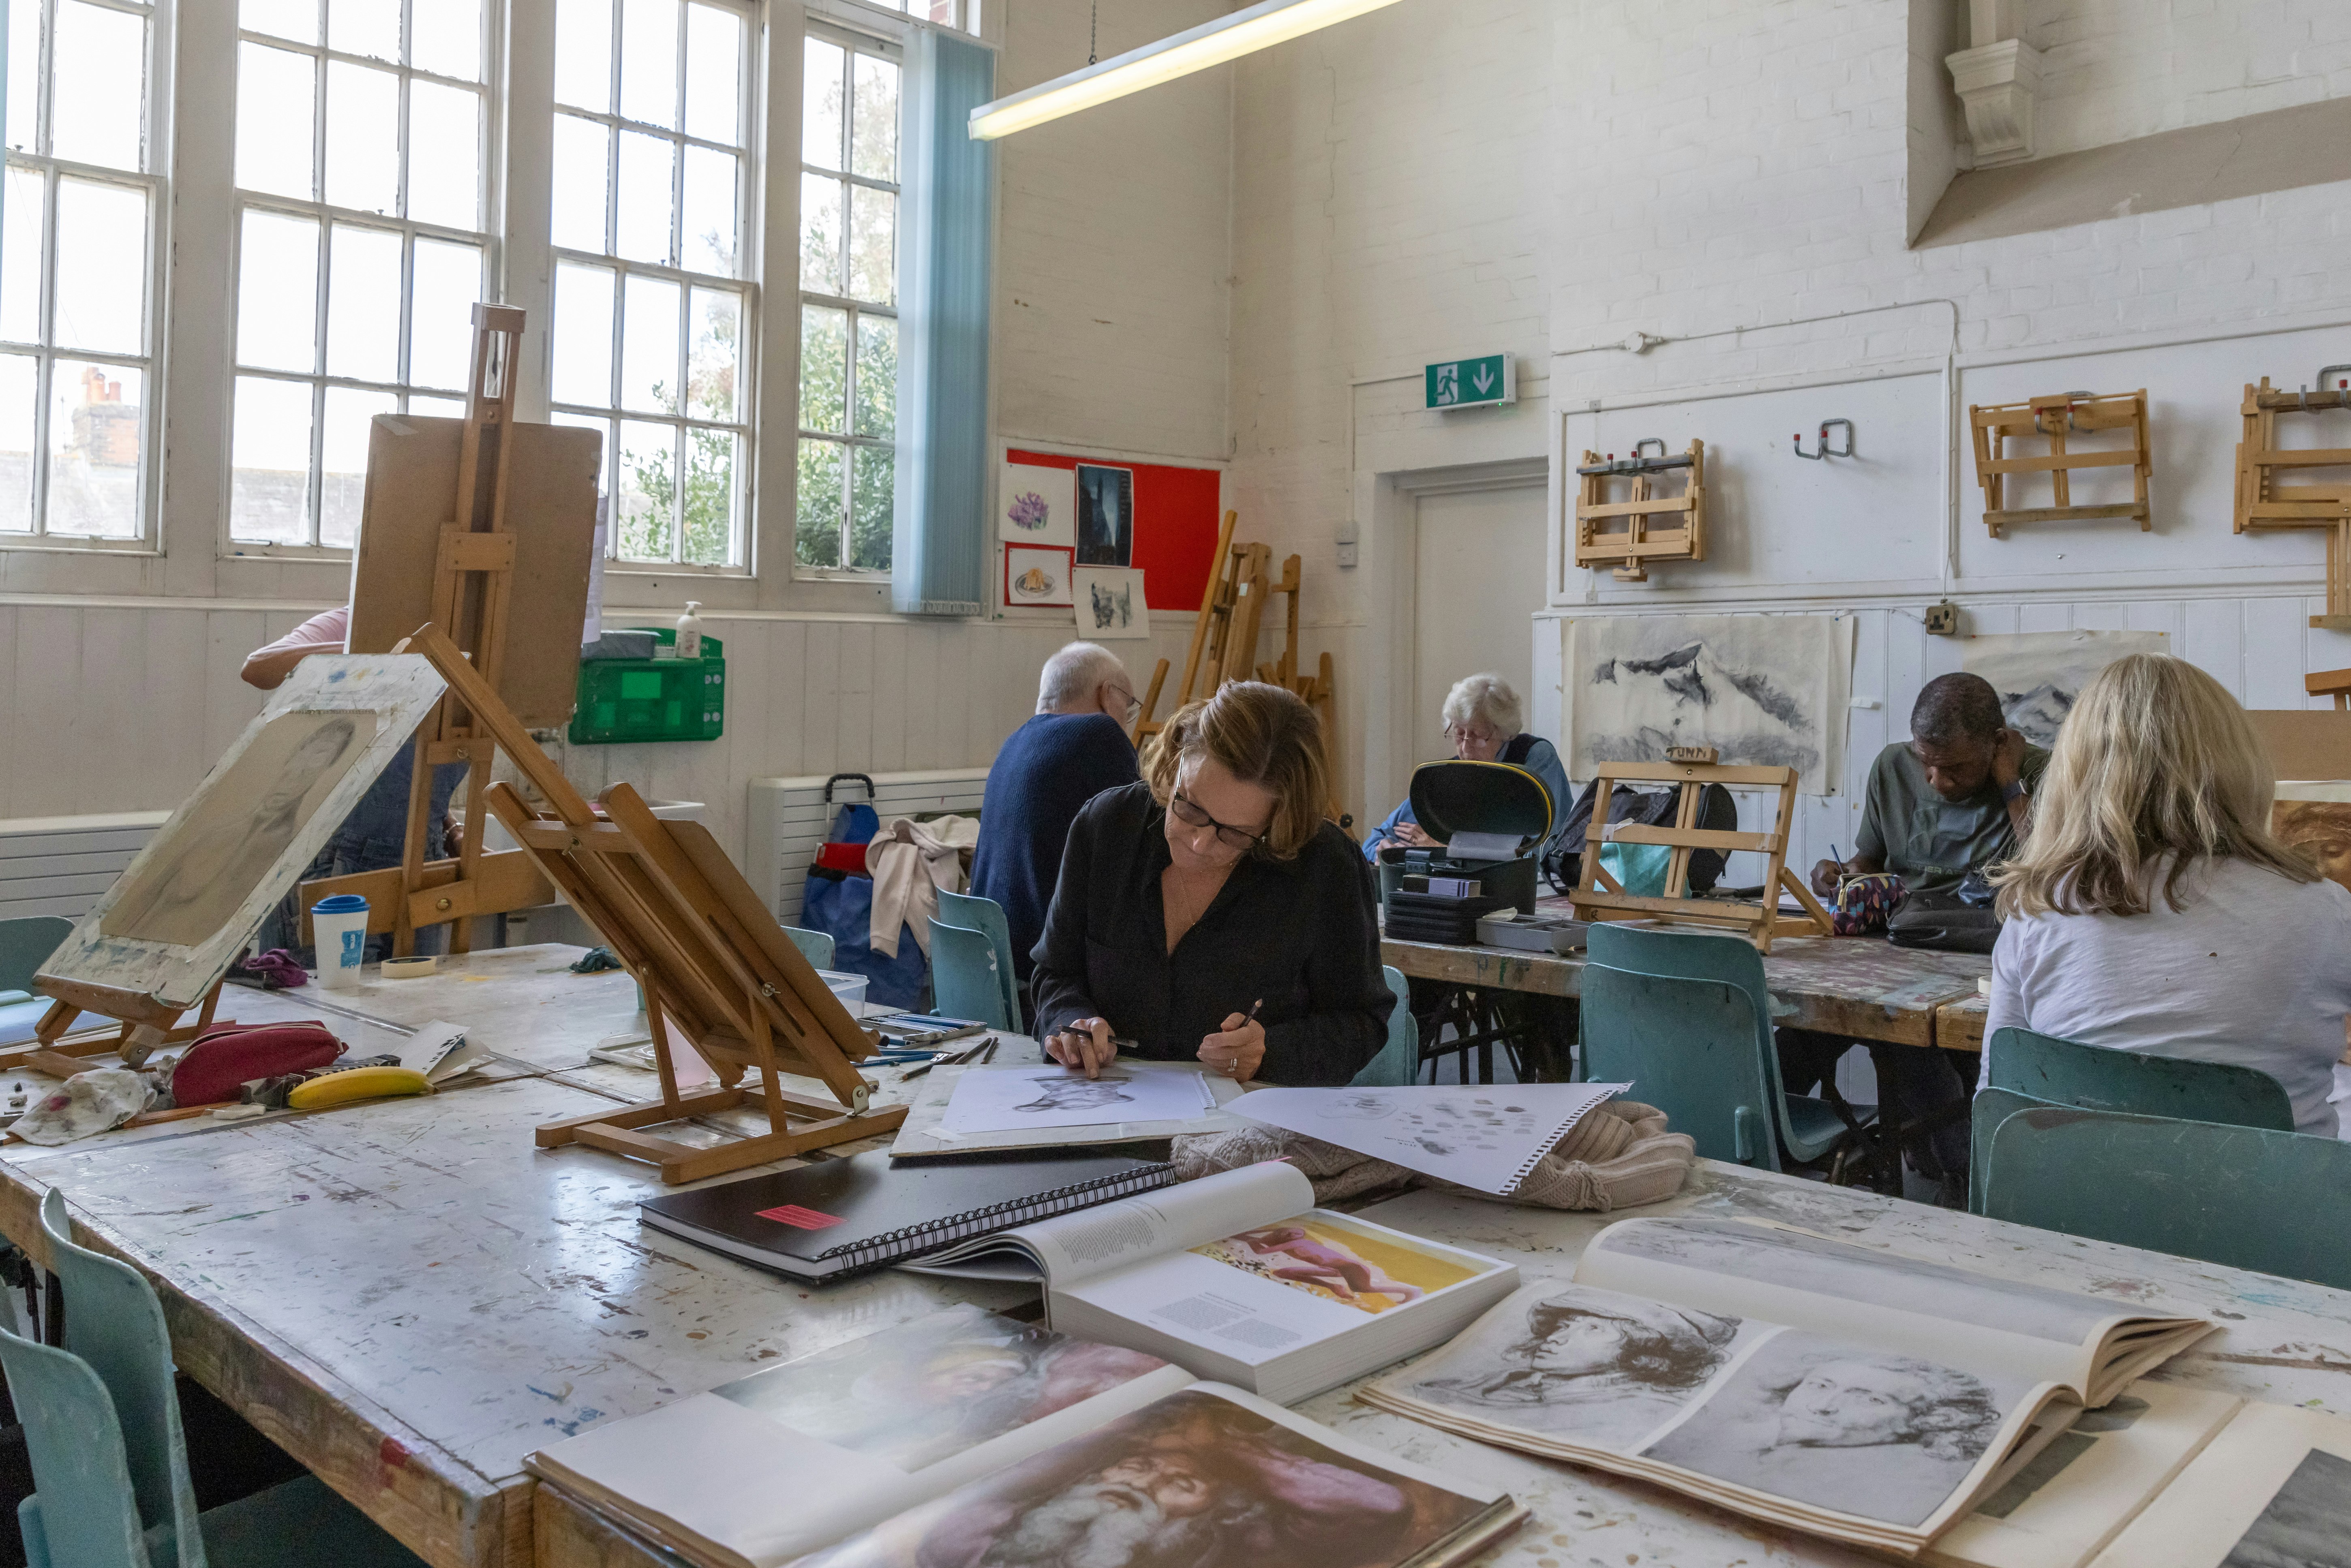 An image of a large well lit room. Five adults can be seen creating art work. They are sat at desks surrounded by paper, art books and easels